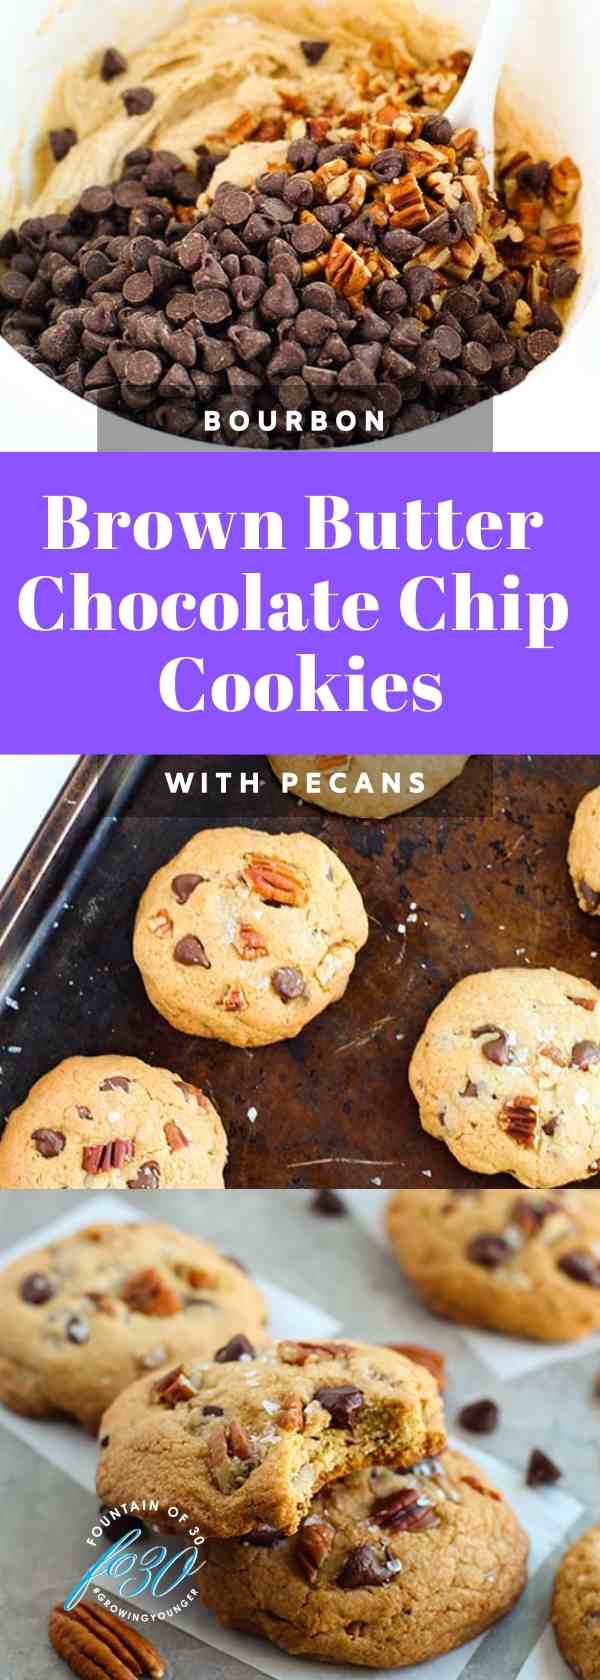 chocolate chip cookies with bourbon and pecans fountainof30